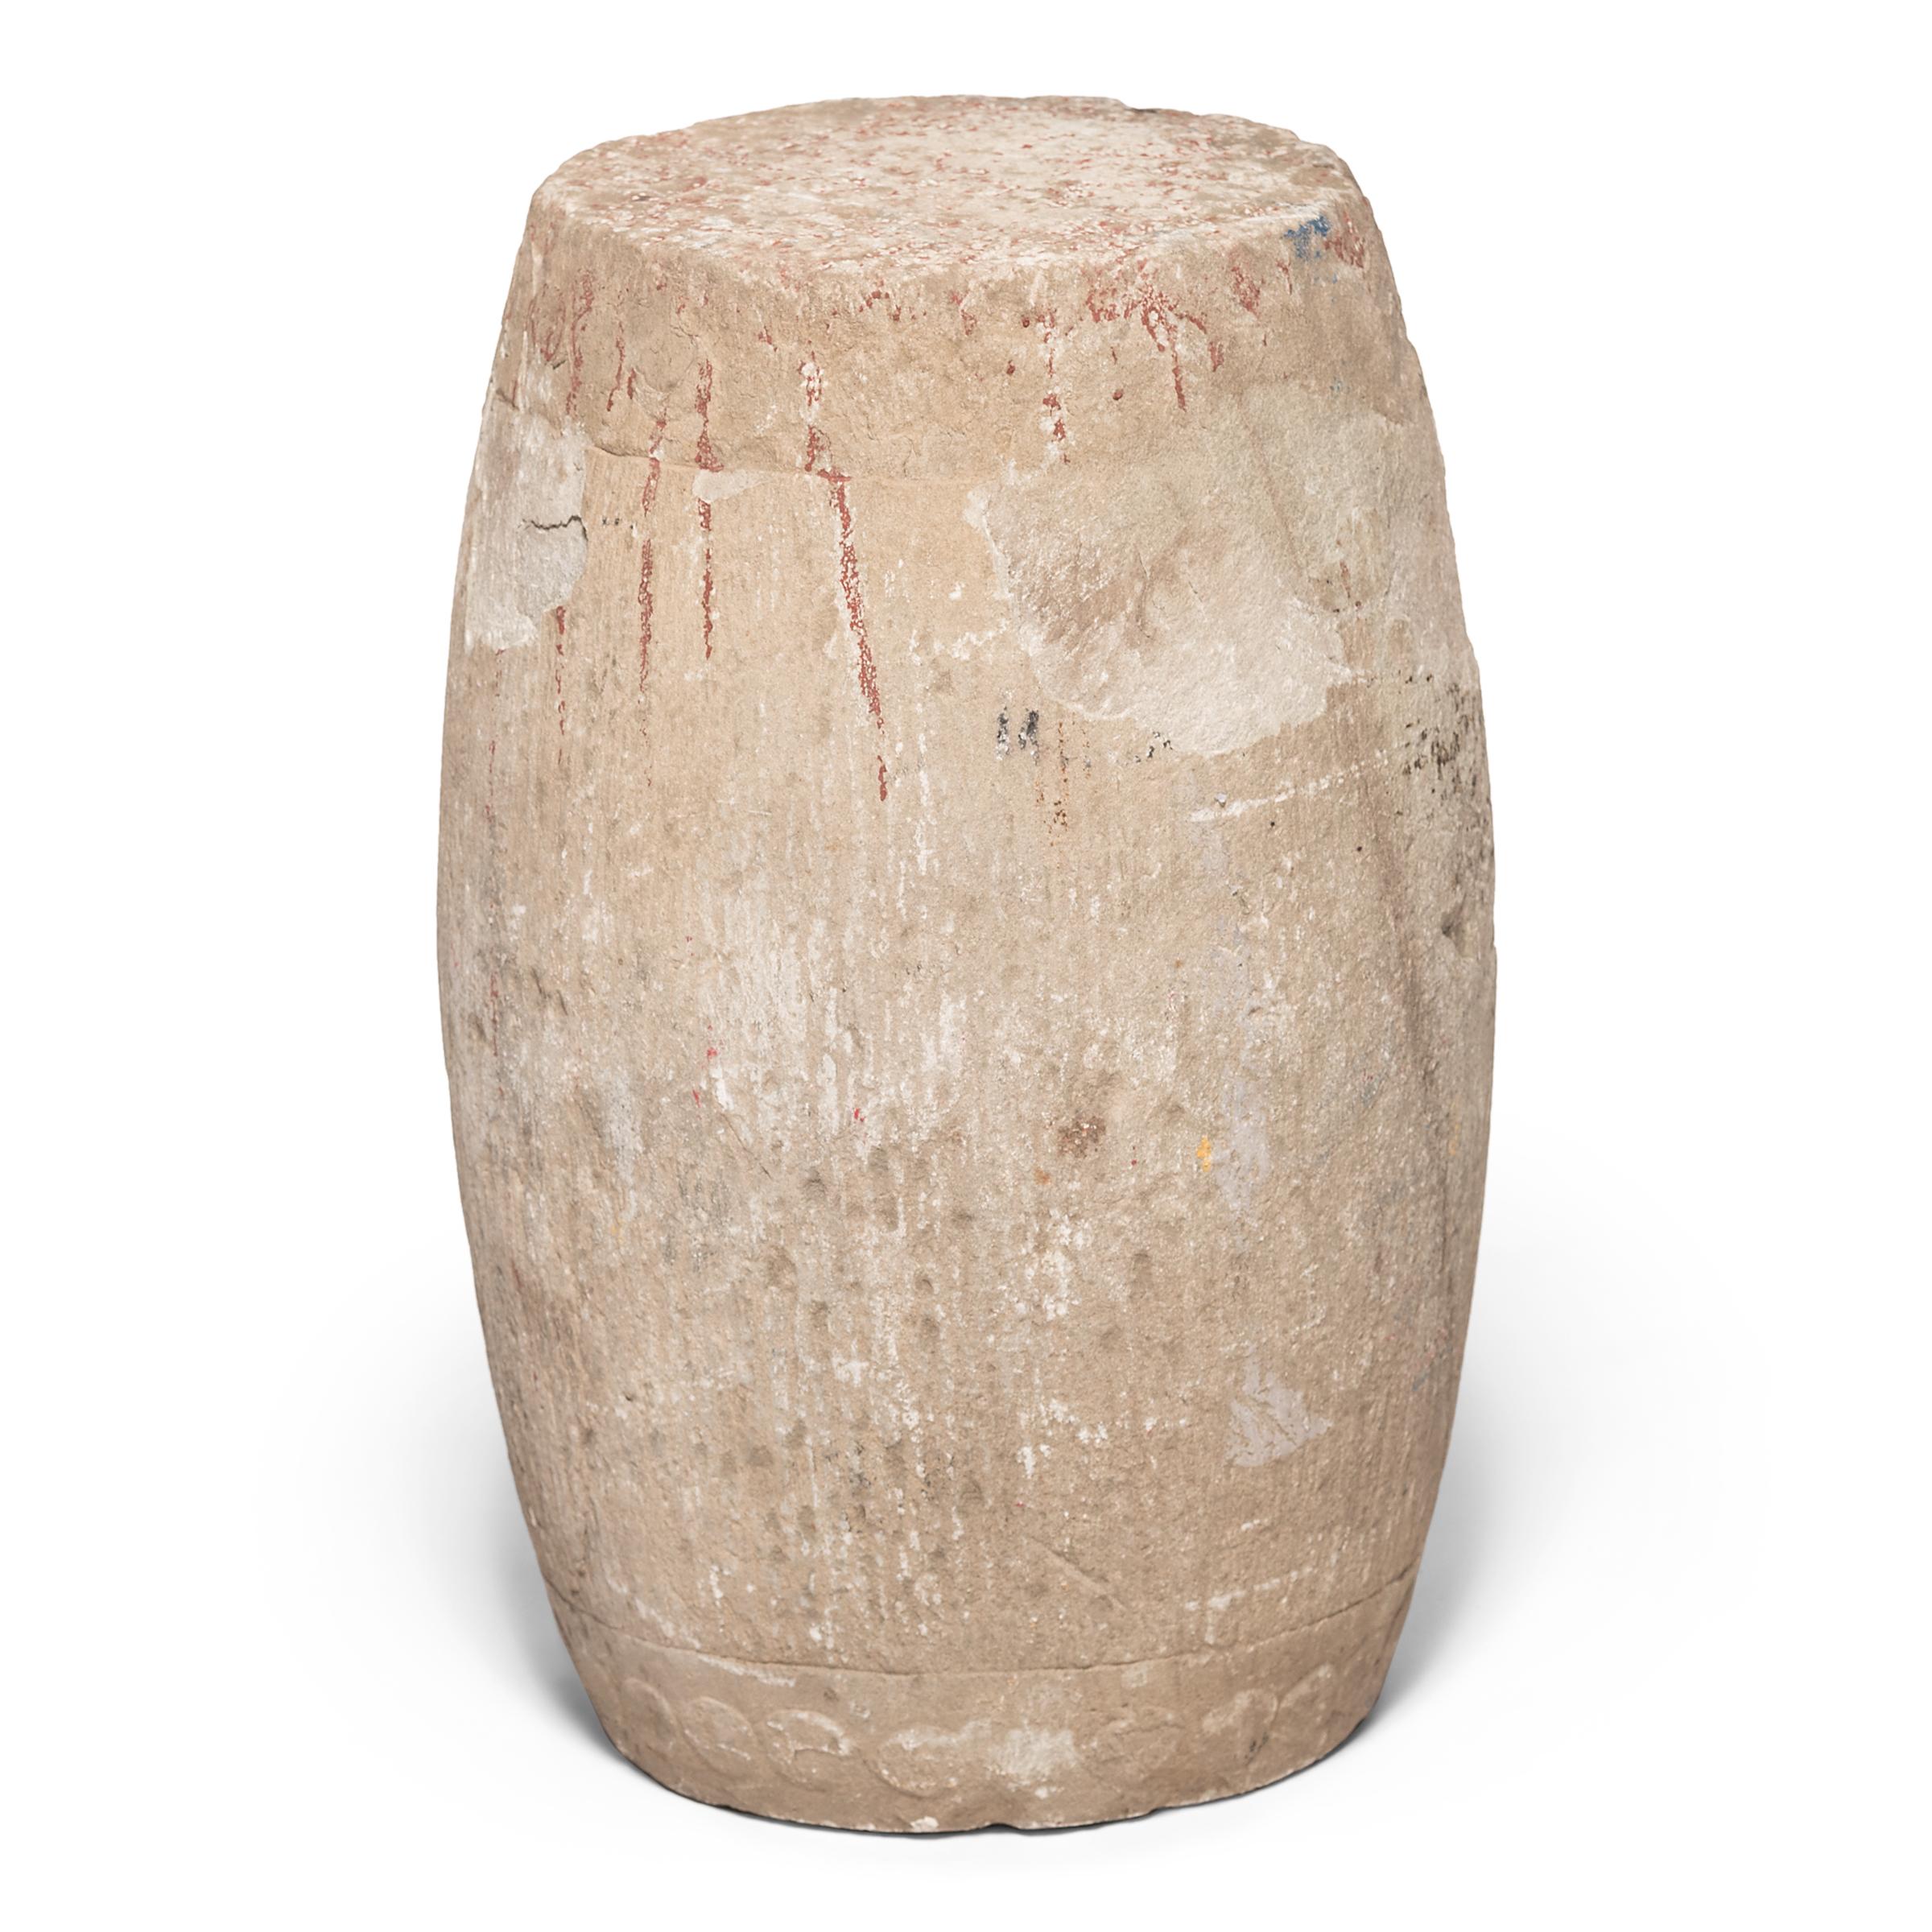 Stone furniture such as this drum carved out of limestone were commonly placed in Chinese gardens and courtyards to reduce the amount of indoor furniture that would have to be moved to accommodate an outdoor gathering. Carved circa 1800 out of a